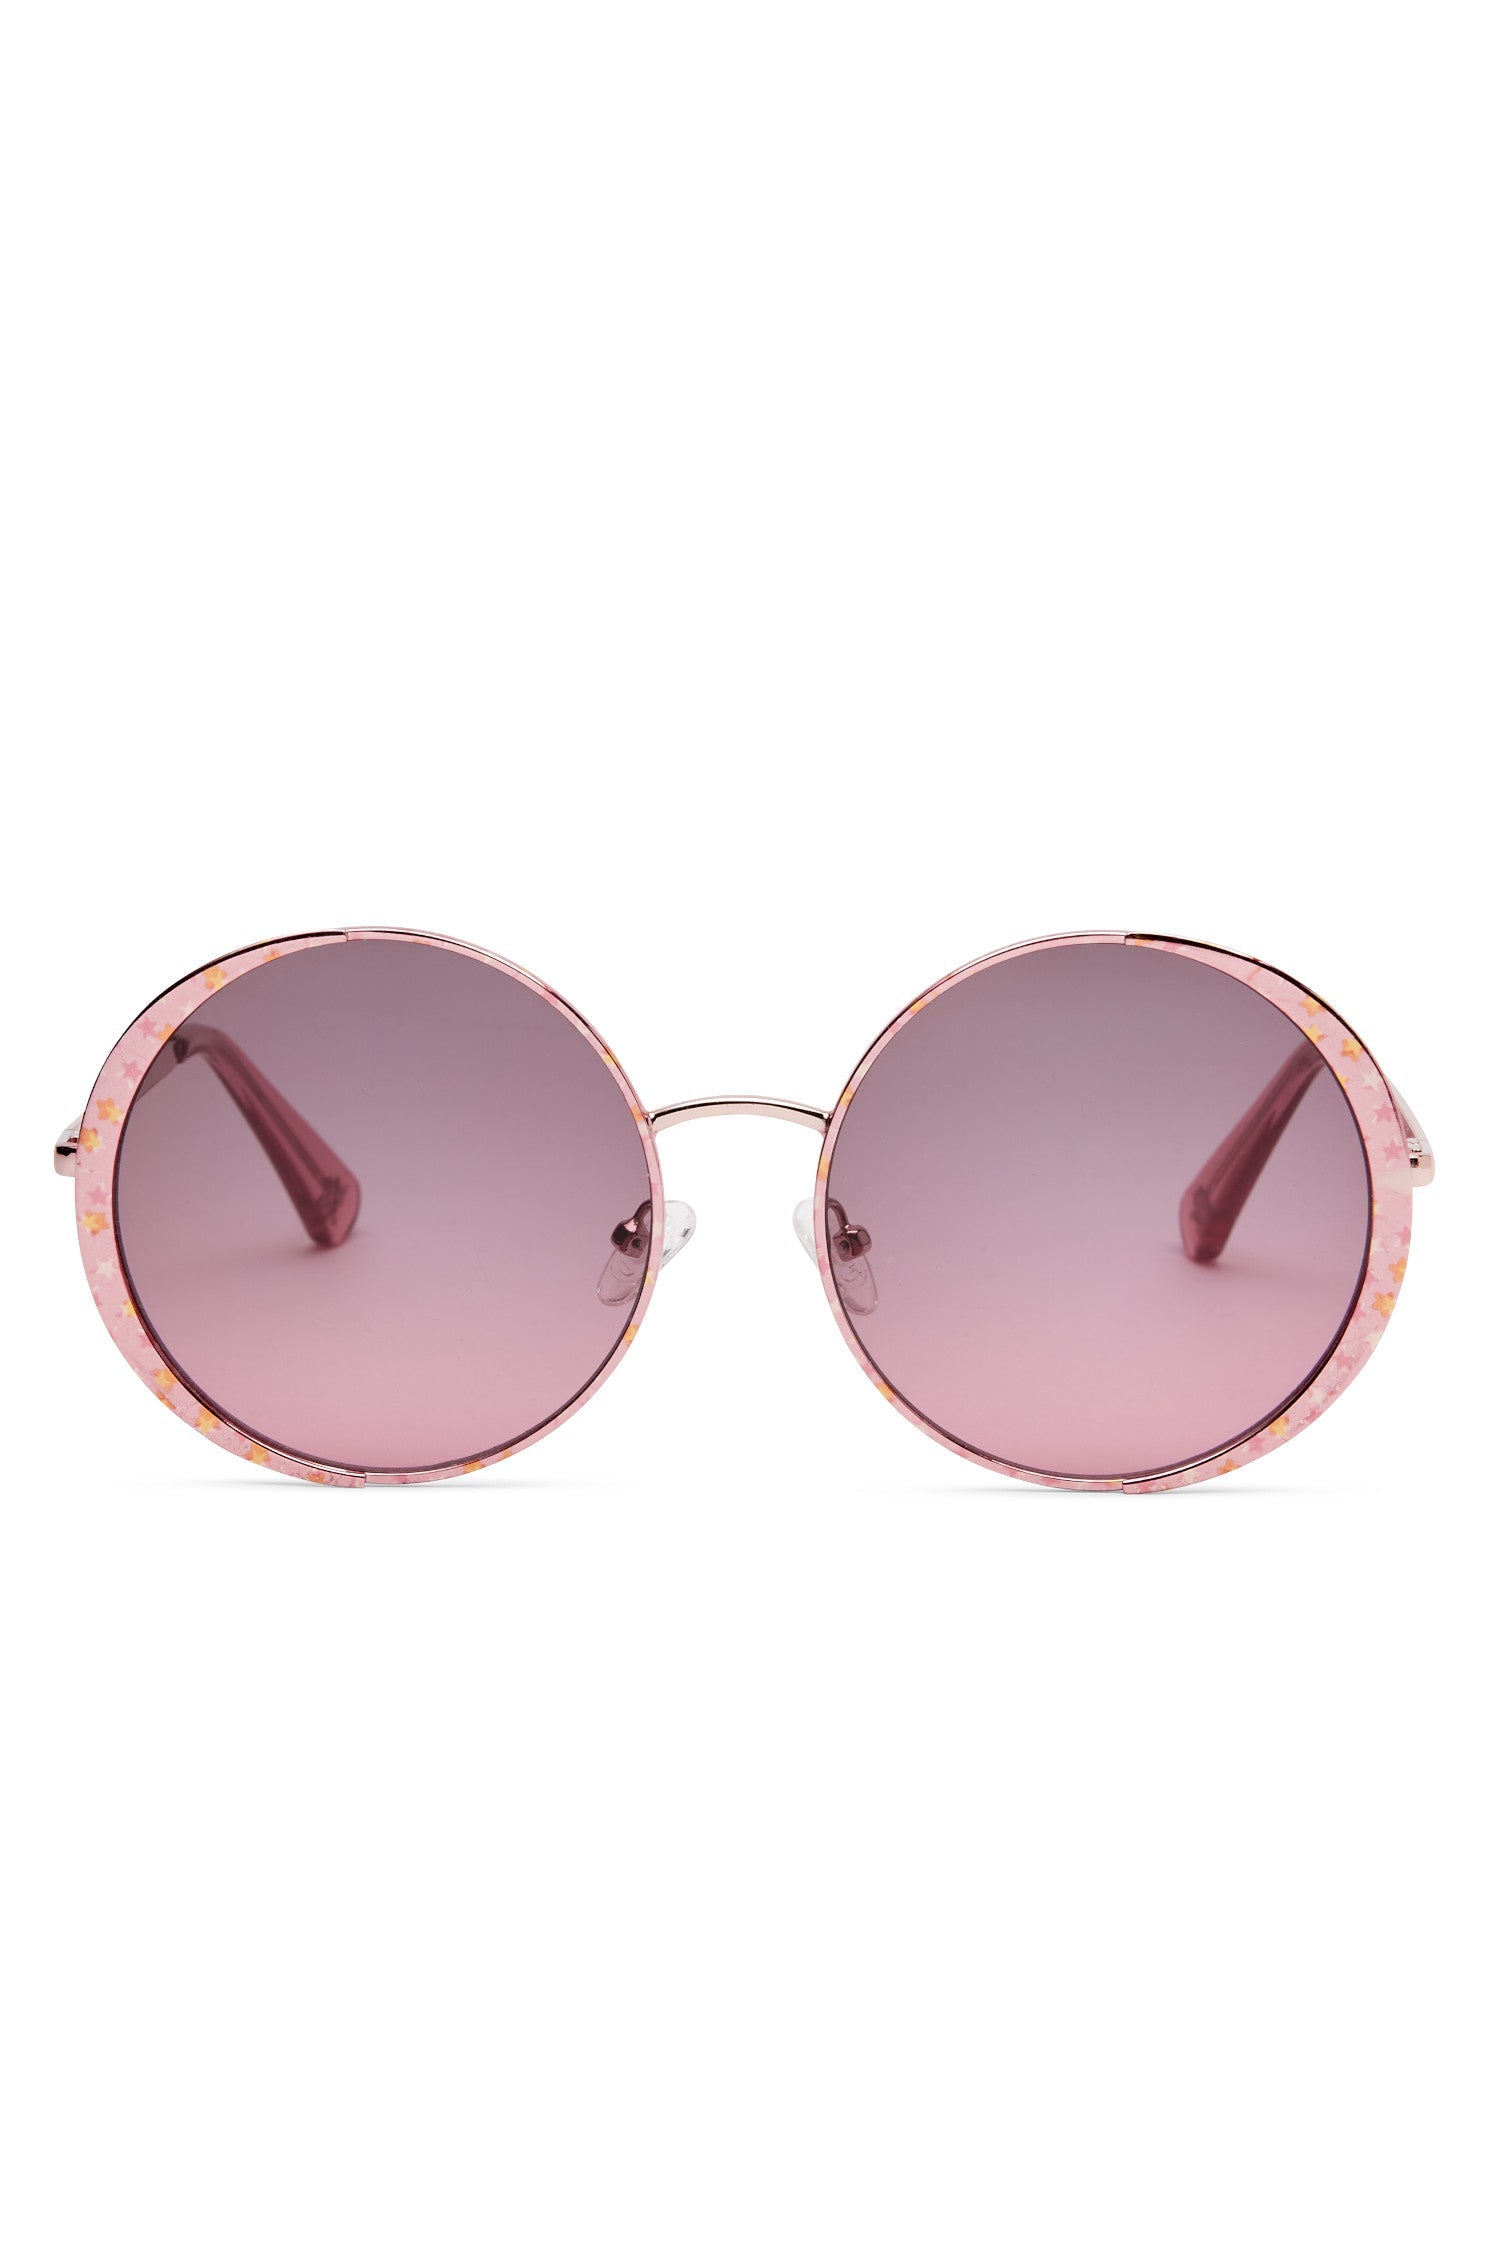 Womens round sunglasses with star detailing